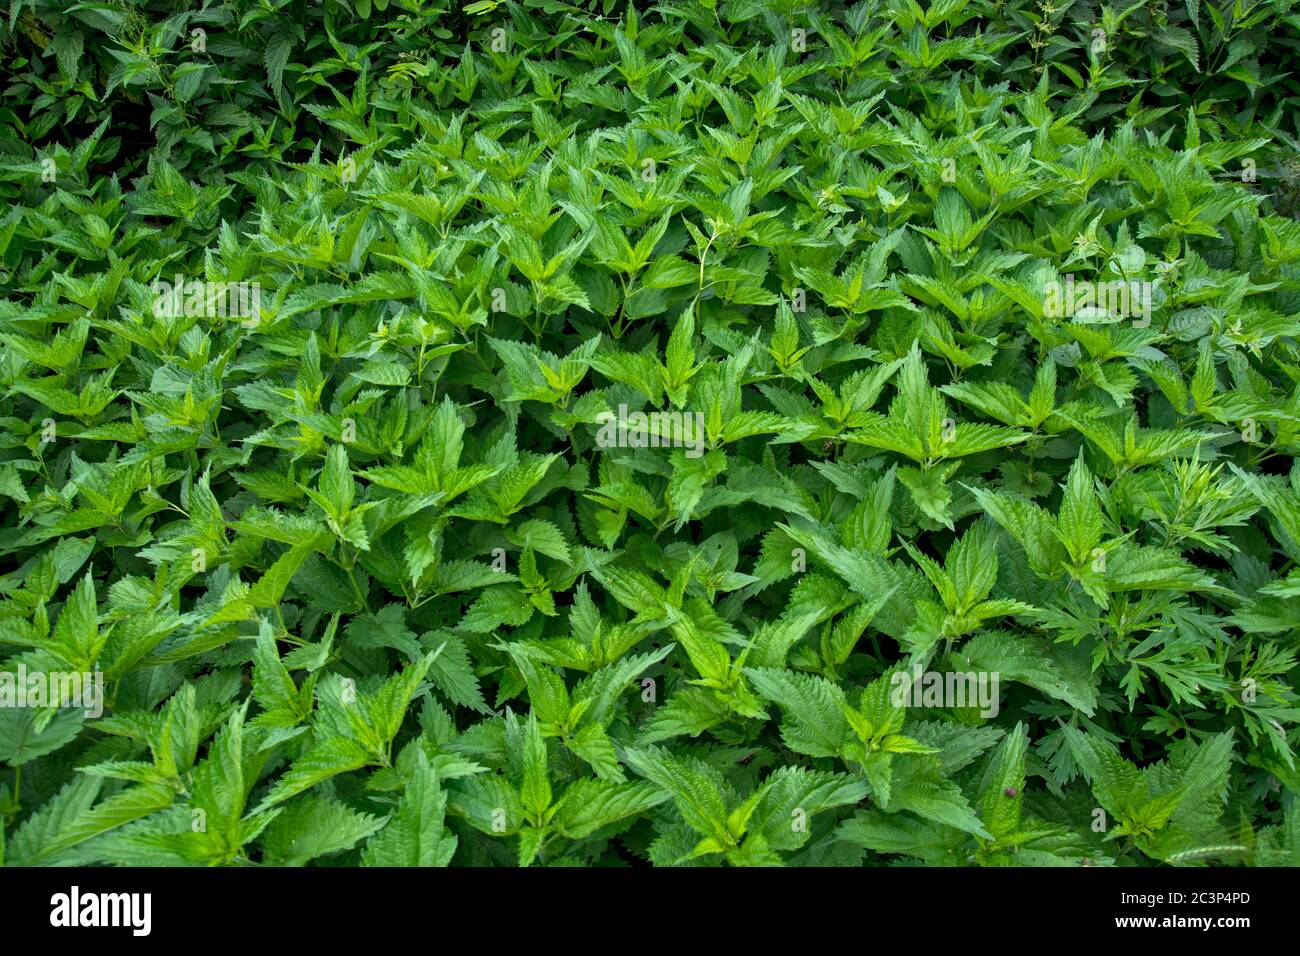 A nice big bush of young nettles. Nettle is a plant that is often used in the diet of both humans and animals. Stock Photo